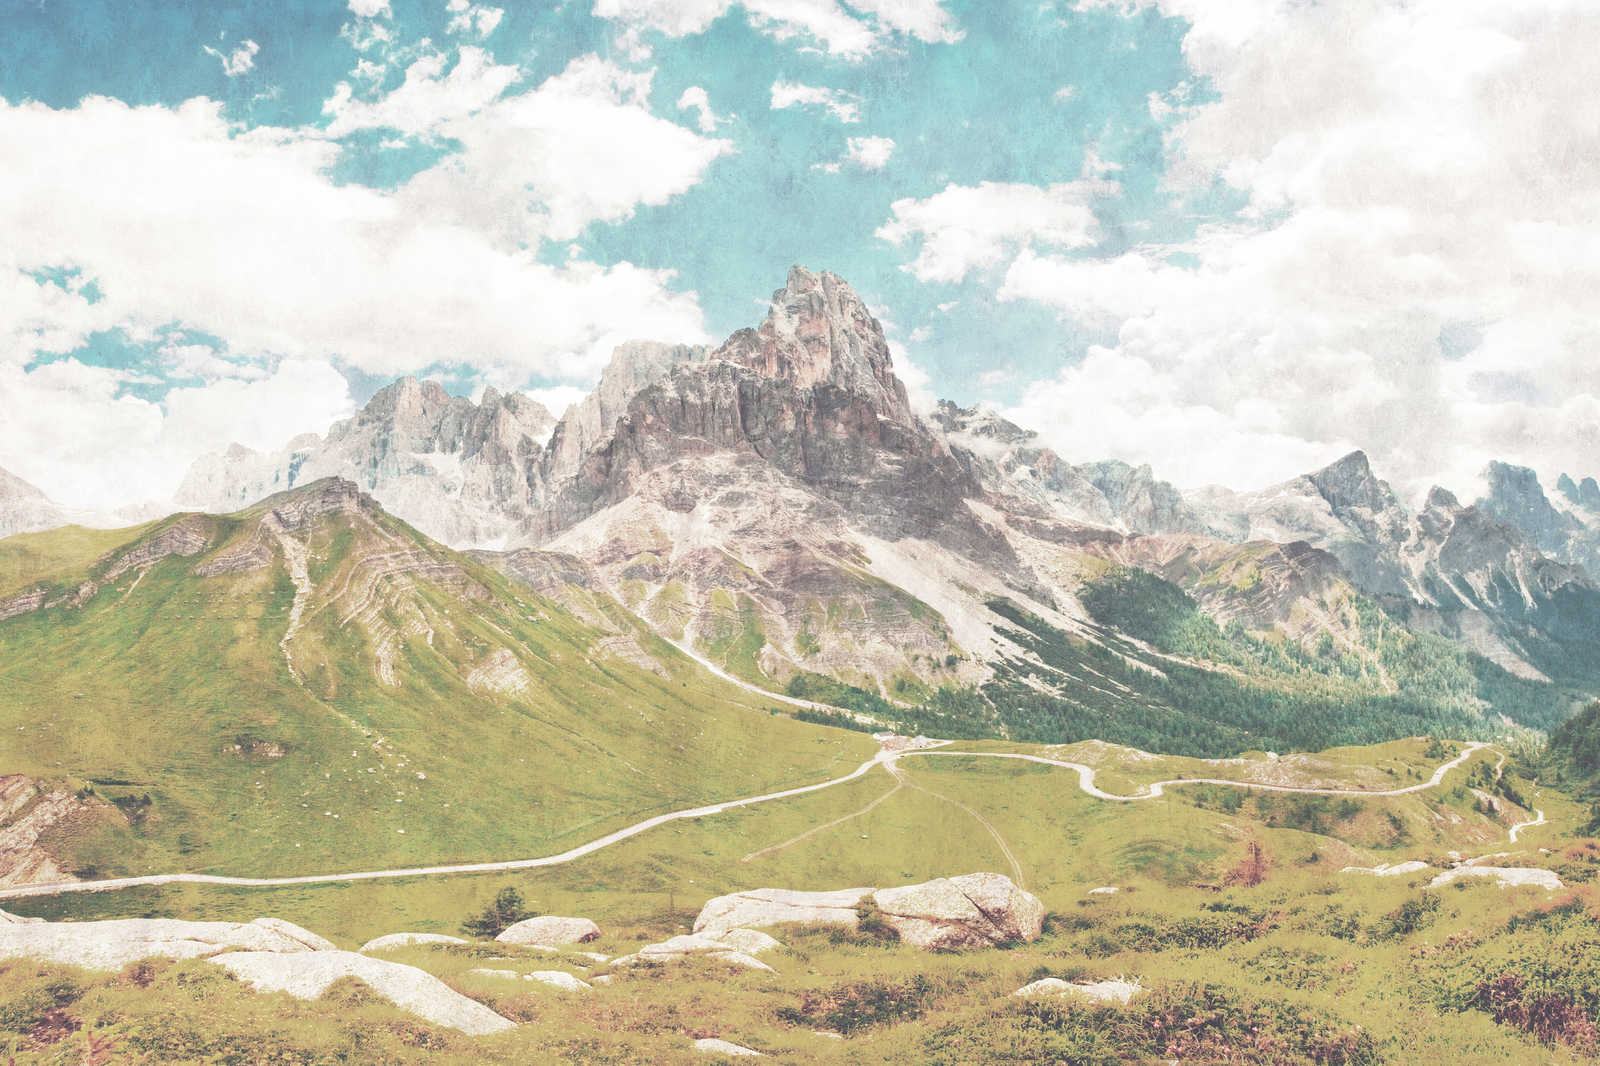             Dolomiti 2 - Canvas painting Dolomites retro photography in blotting paper structure - 0,90 m x 0,60 m
        